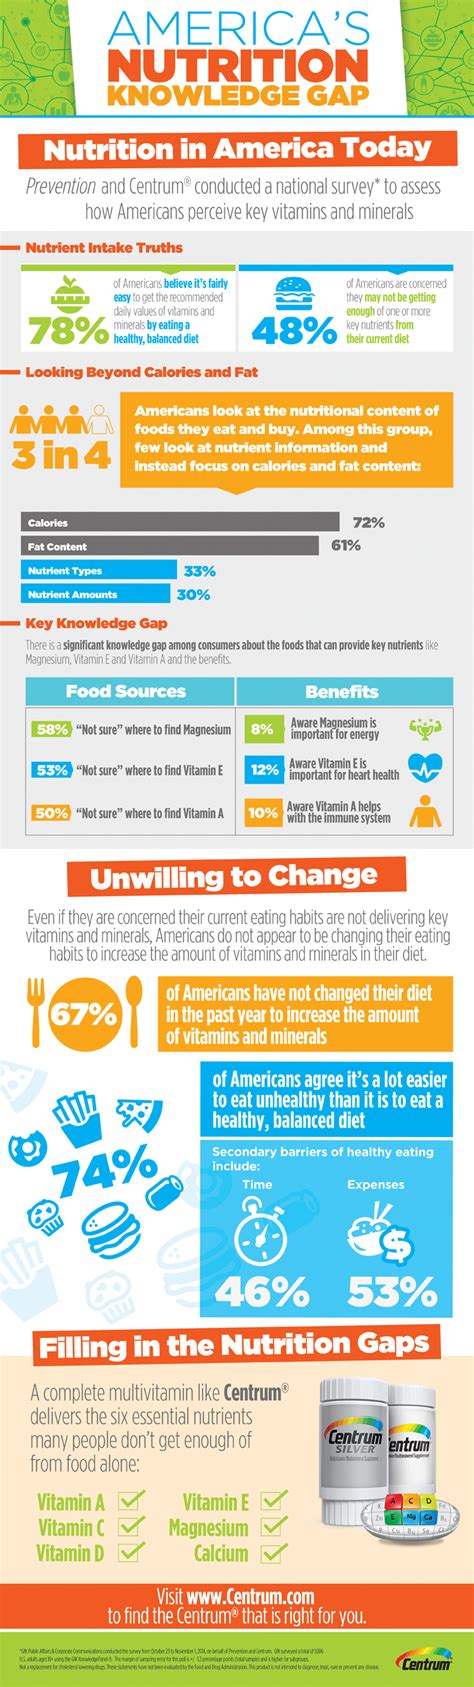 Dietary Gaps Exist Prevention And Centrum R Conducted A National Survey